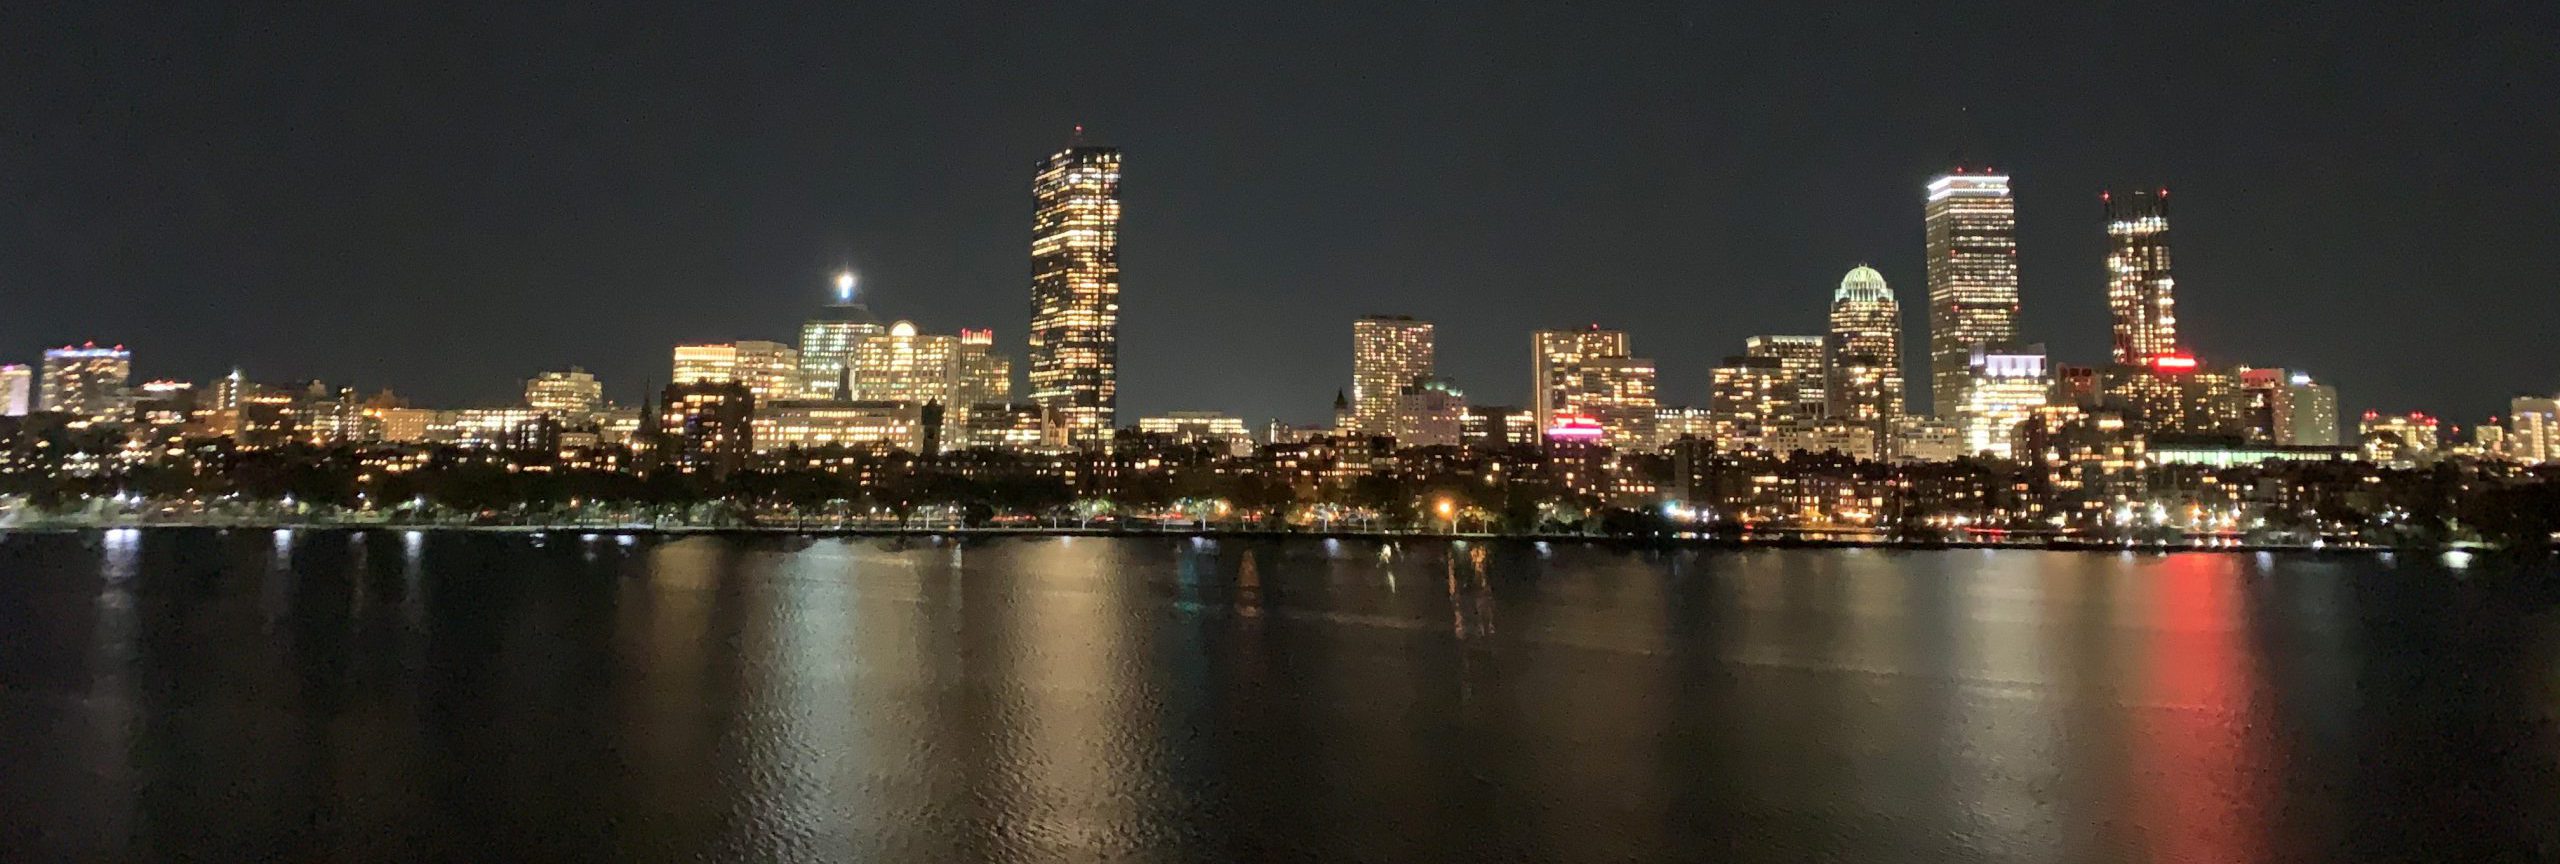 Boston by night, city panorama across the Charles River